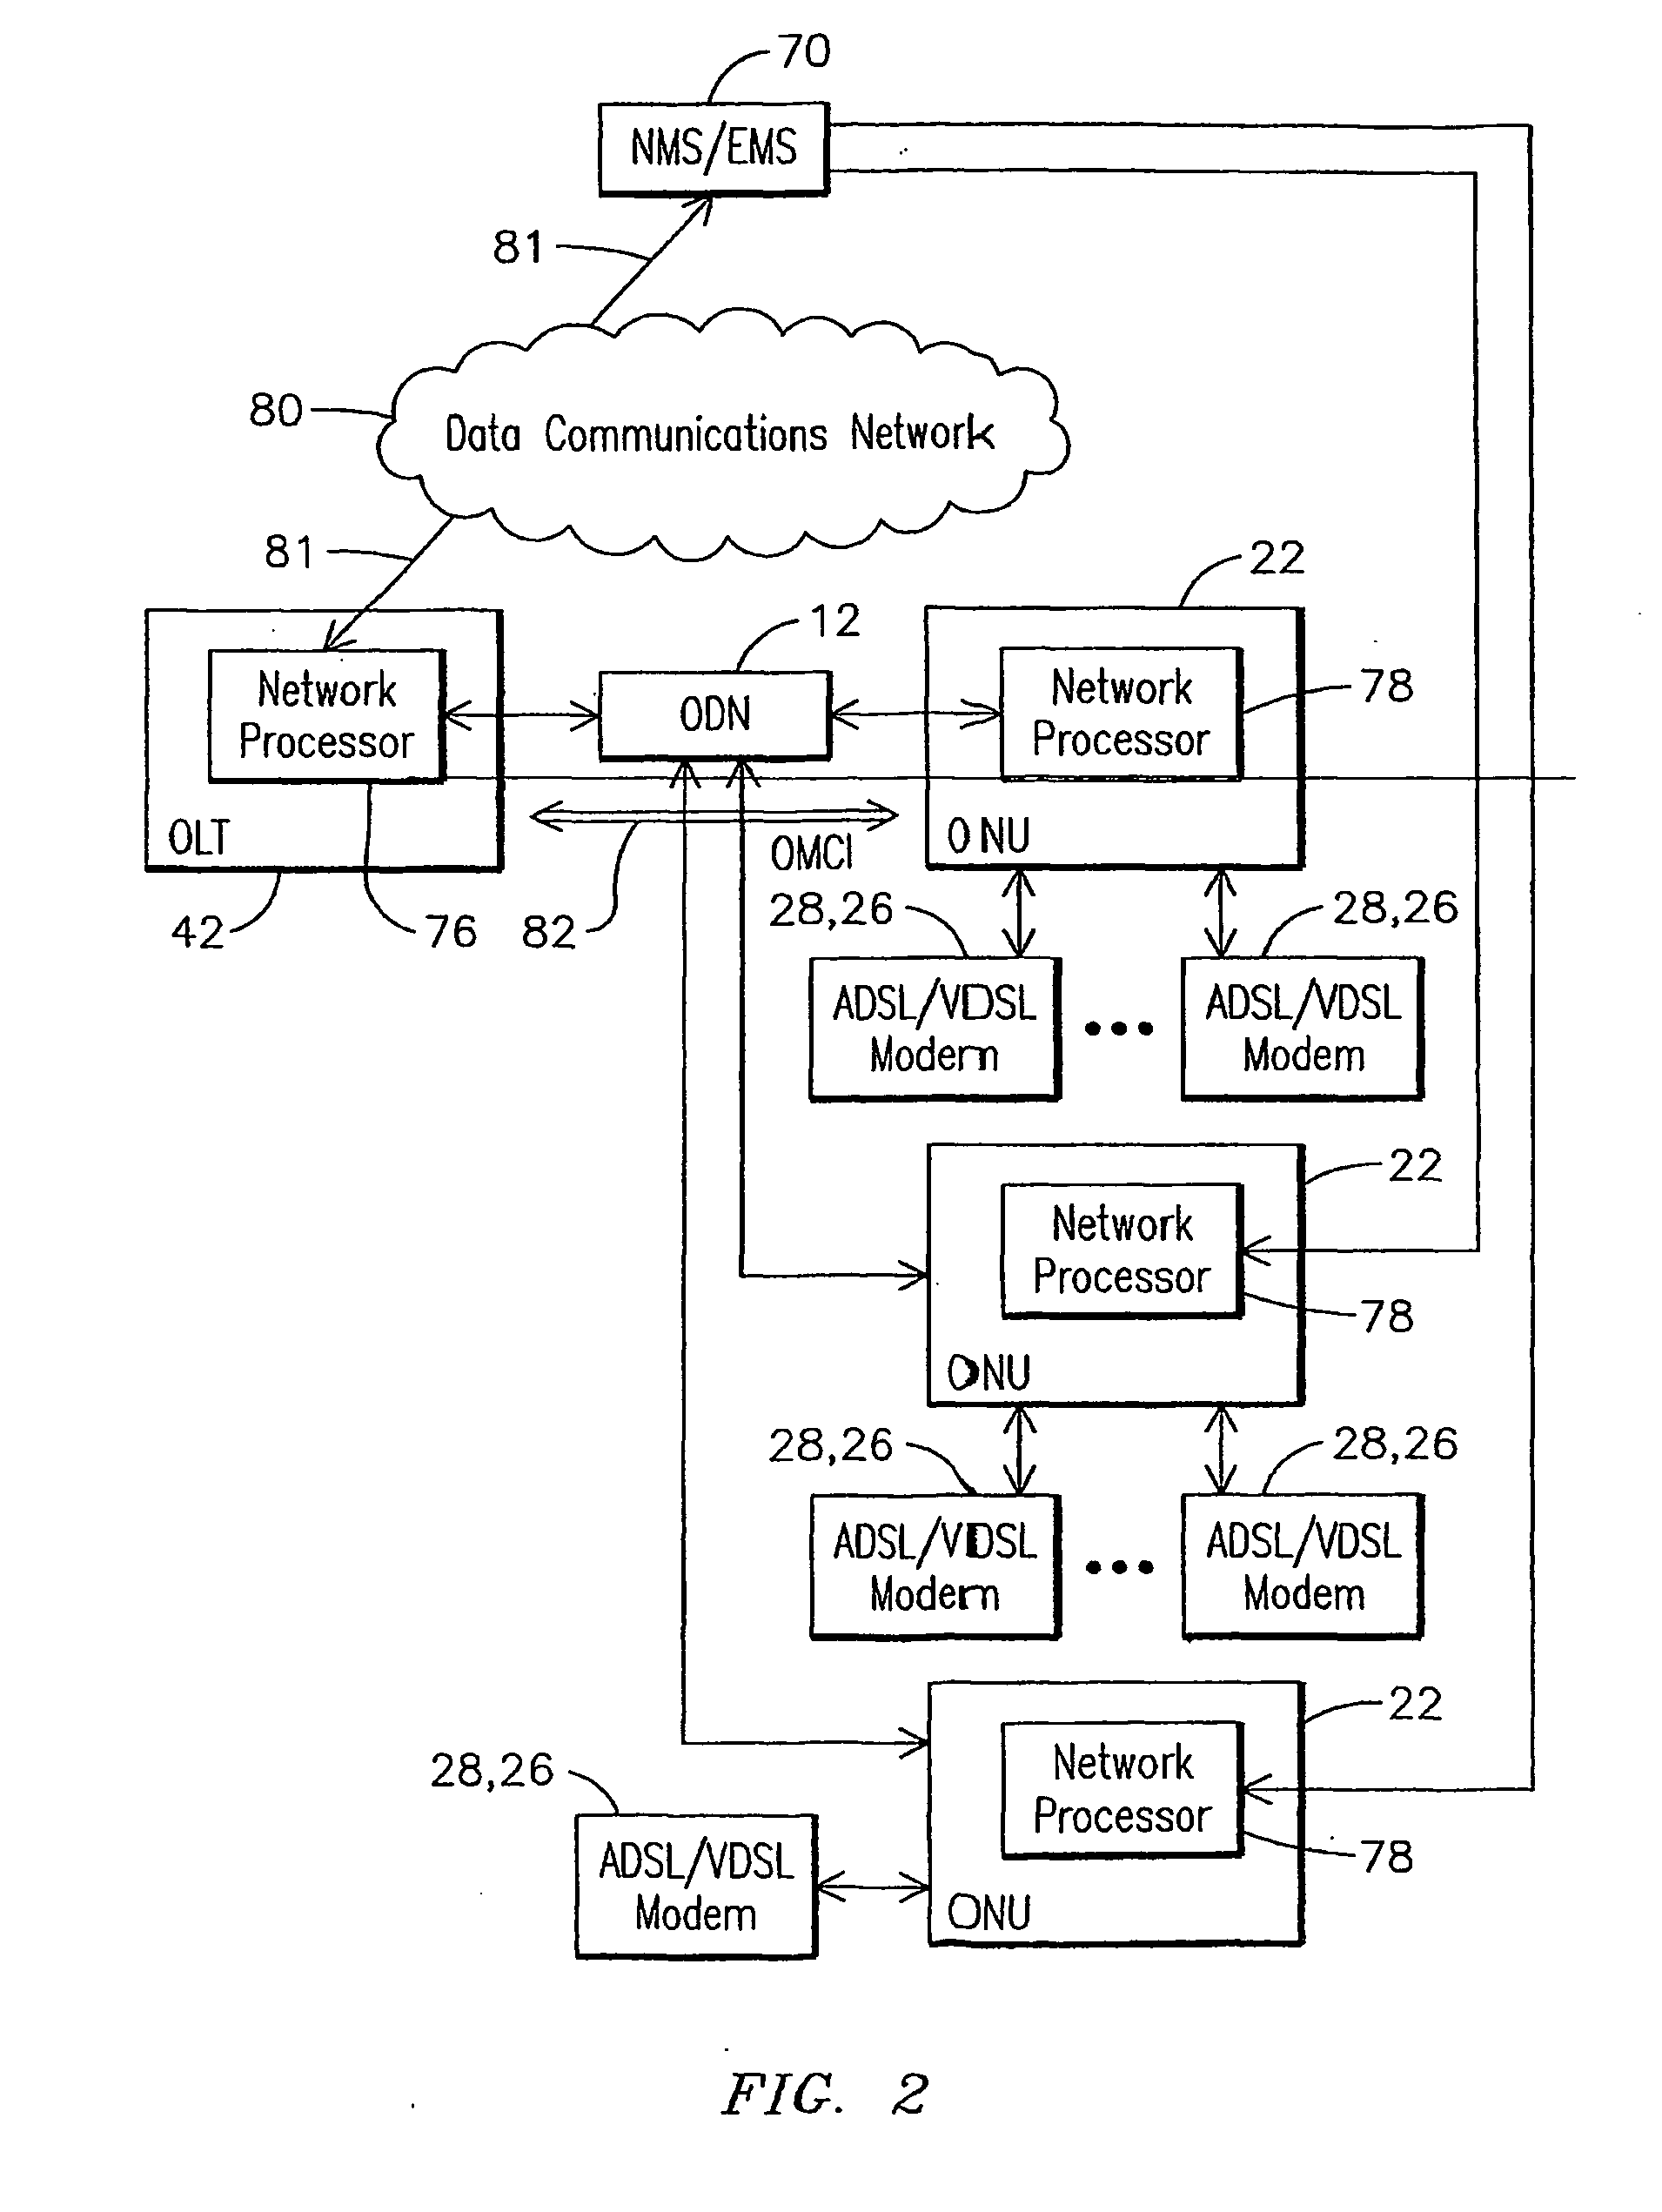 Passive optical network unit management and control interface support for a digital subscriber line network